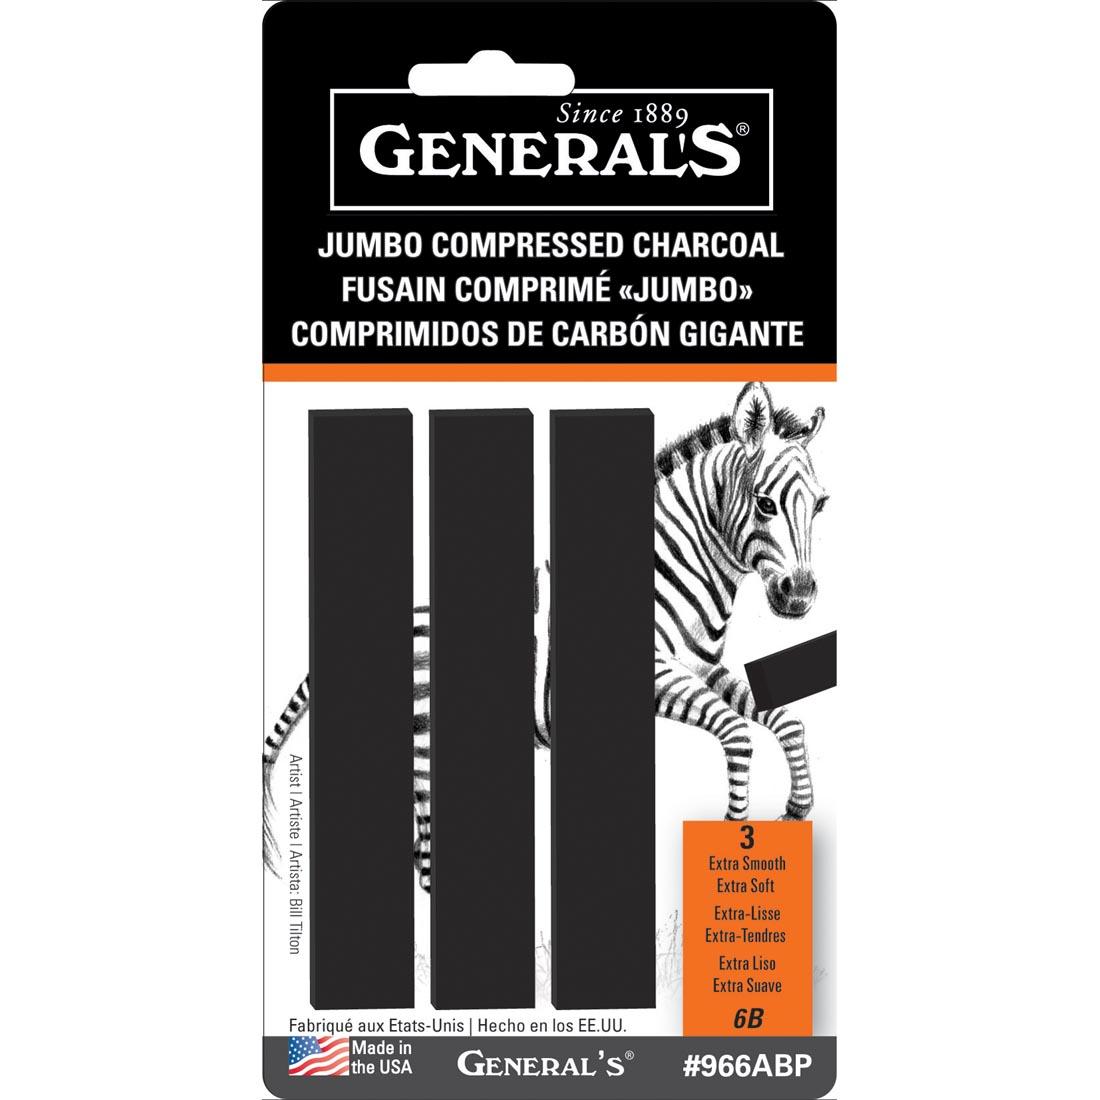 Package of 3 General's Jumbo Black 6B Compressed Charcoal Sticks